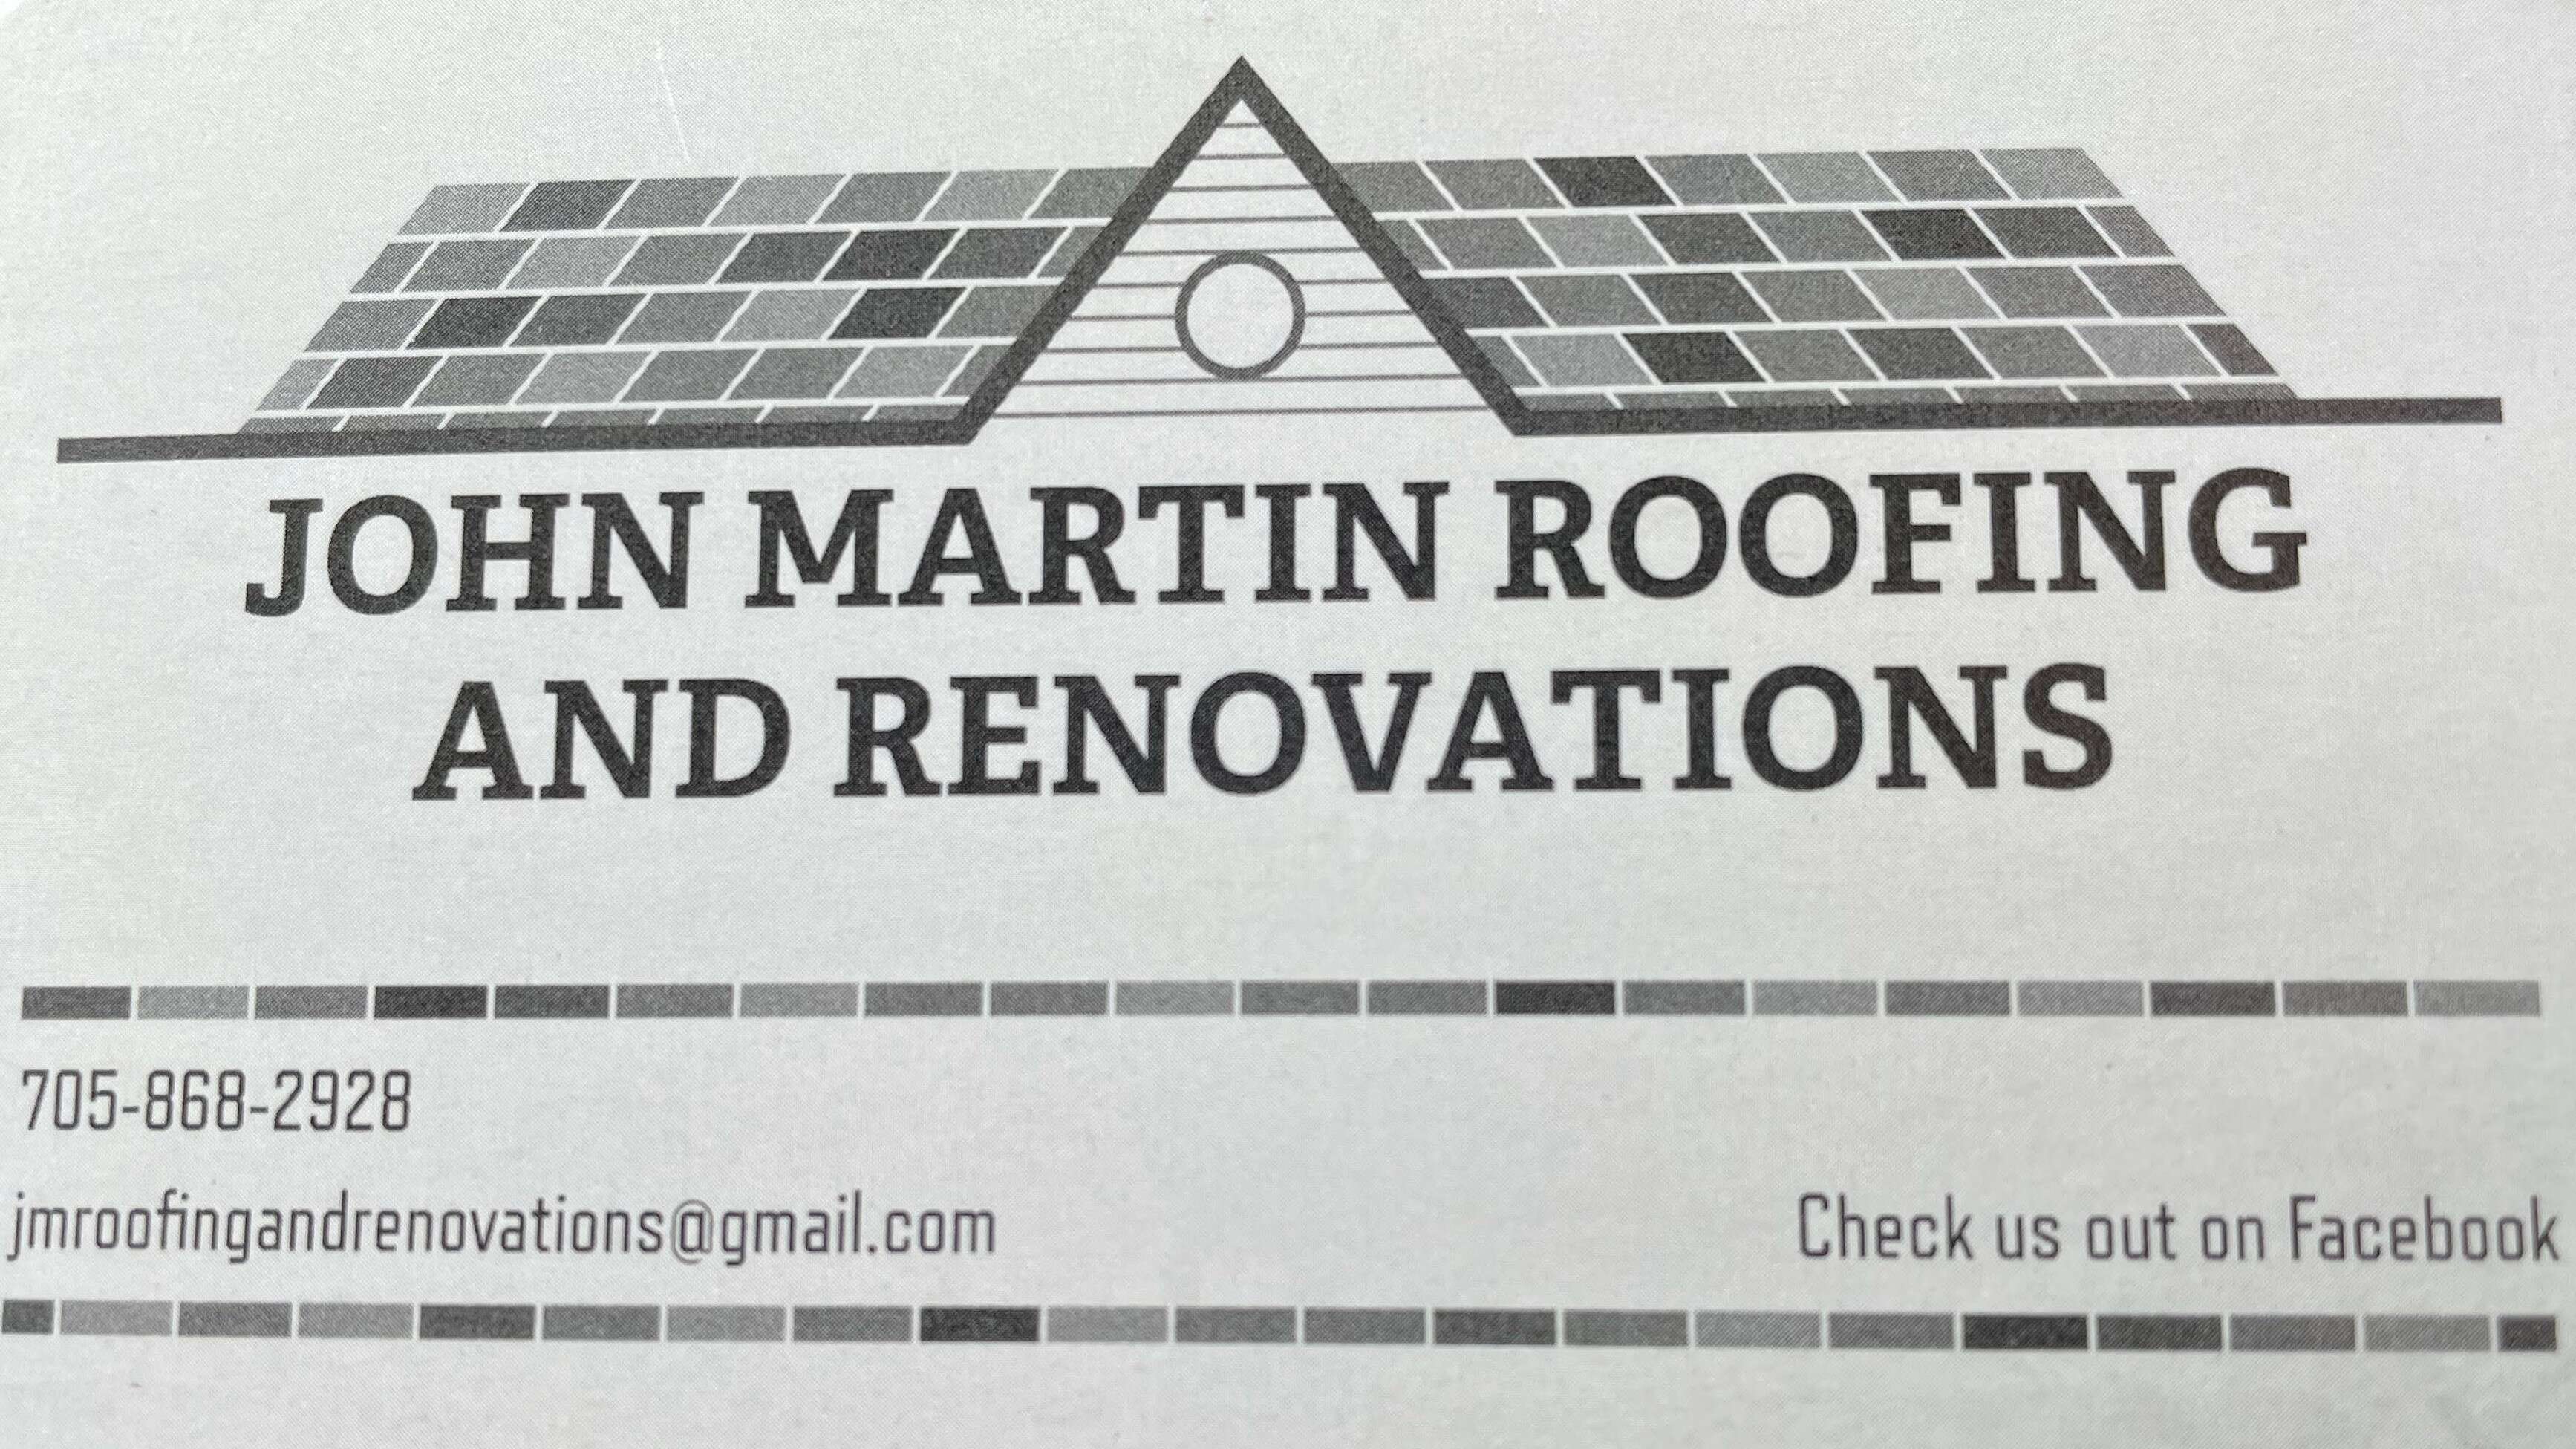 John Martin Roofing and Renovations